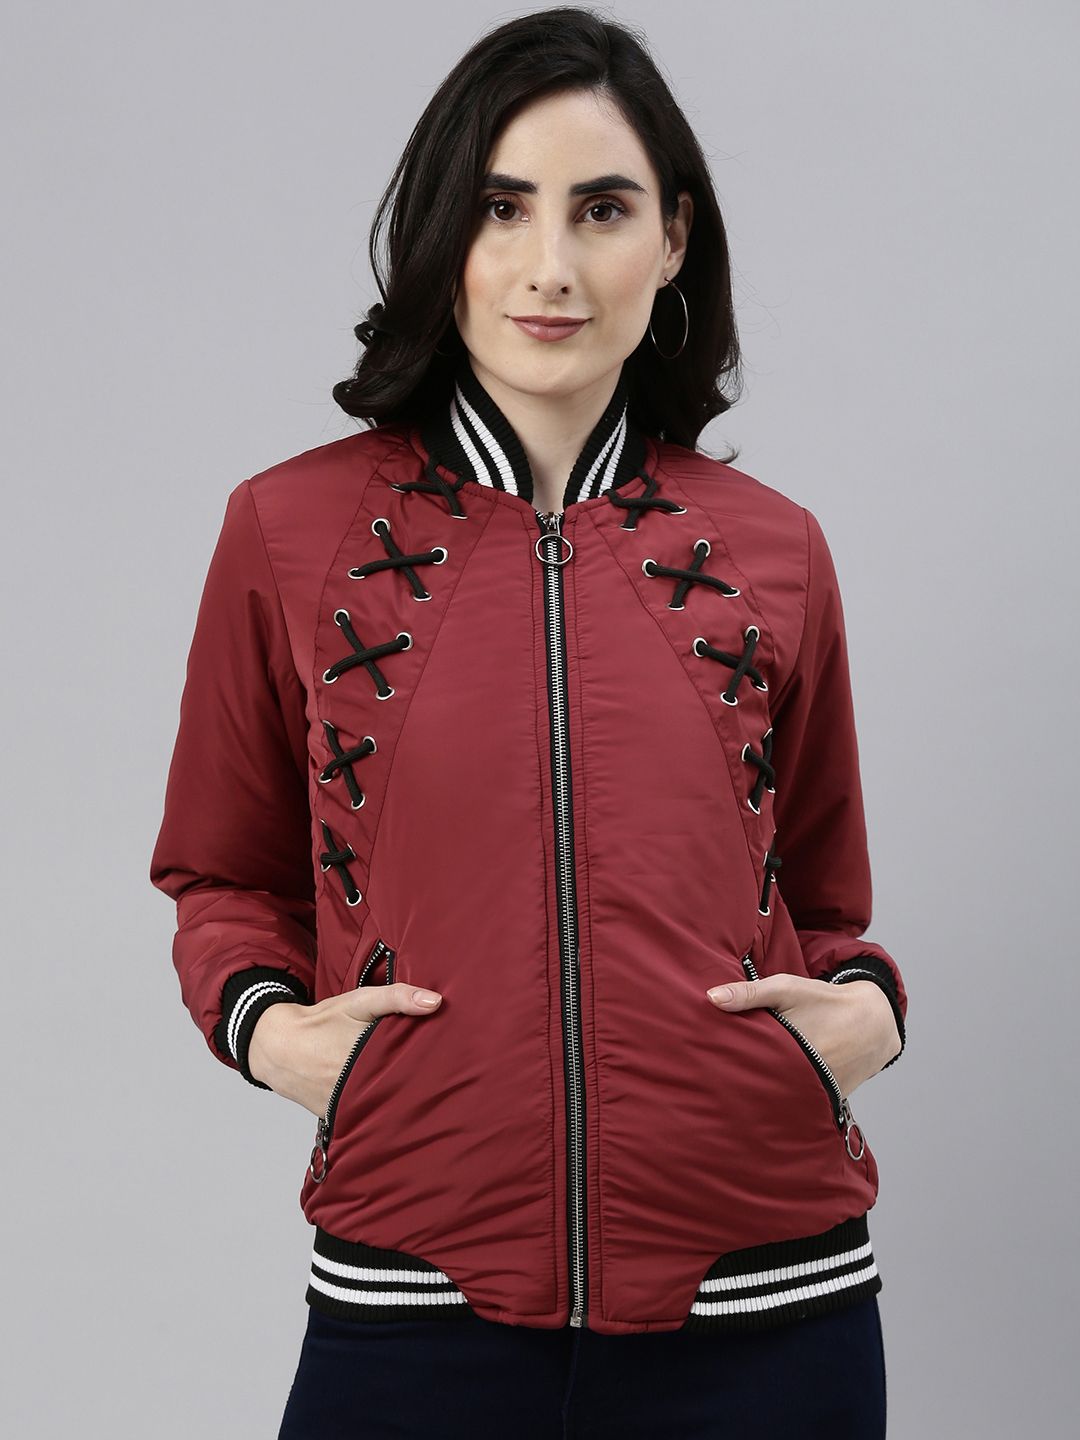 Campus Sutra Women Maroon Outdoor Bomber Jacket Price in India